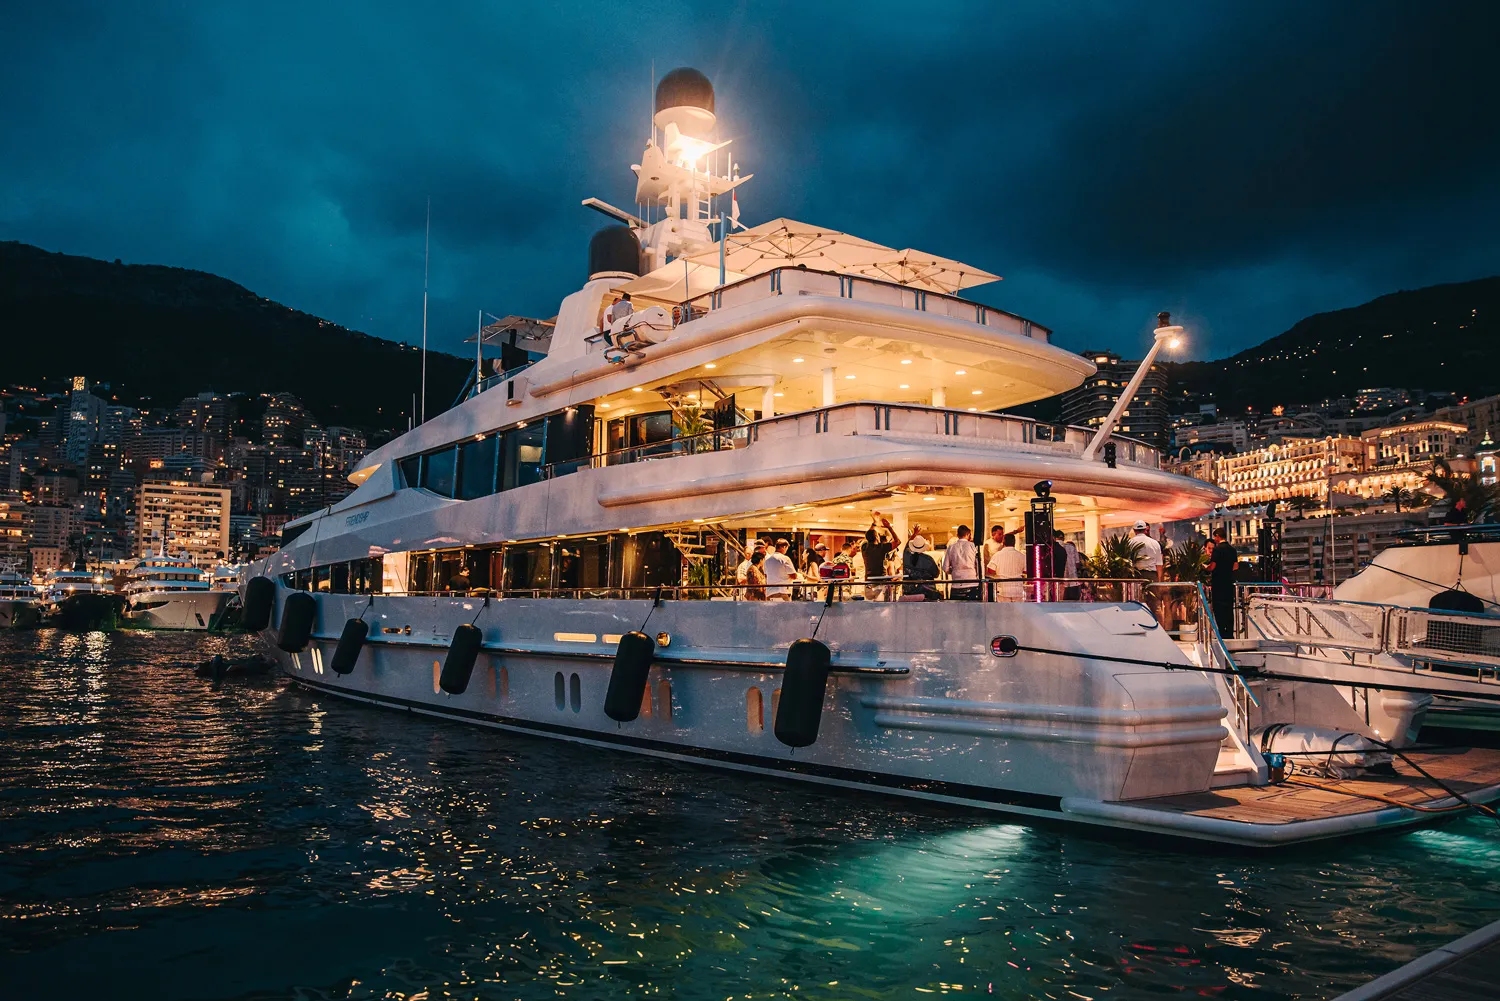 Our ultra-luxe Monaco GP yacht hospitality is the only way to experience the race